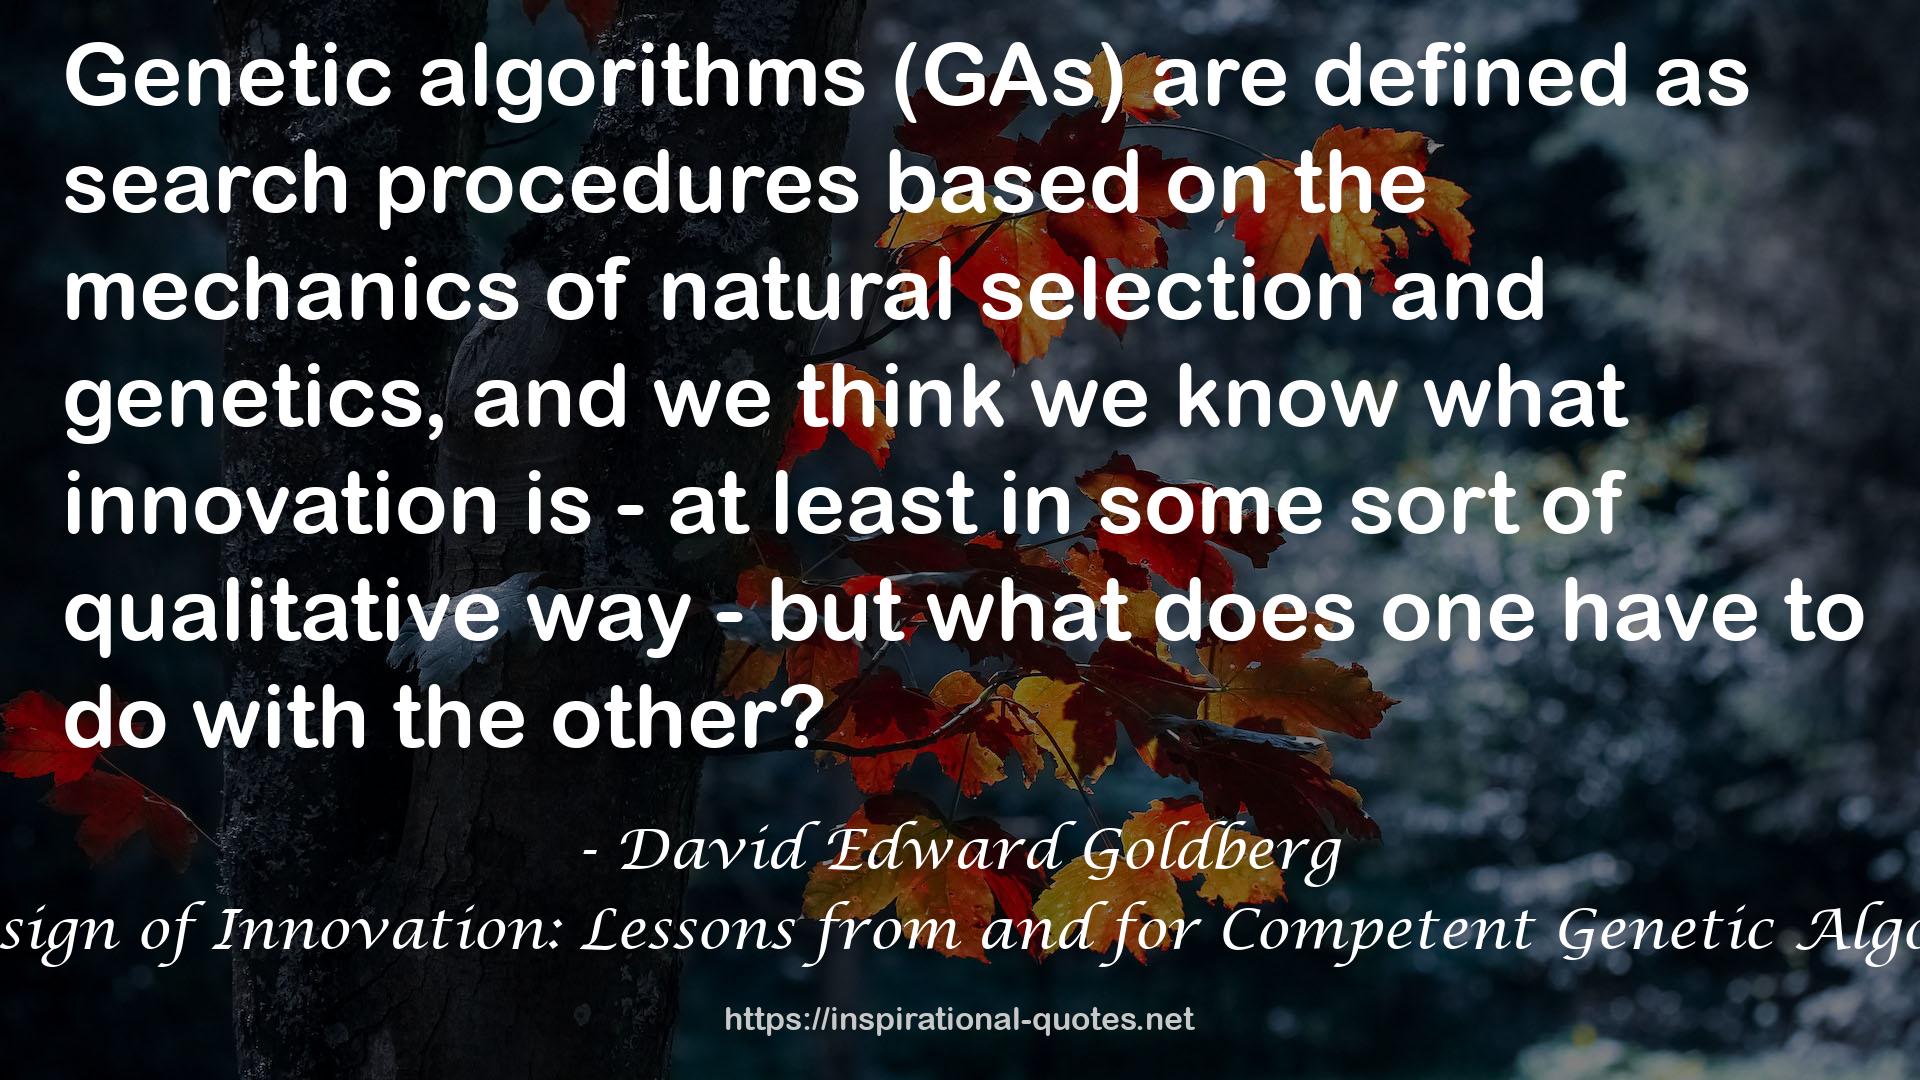 The Design of Innovation: Lessons from and for Competent Genetic Algorithms QUOTES